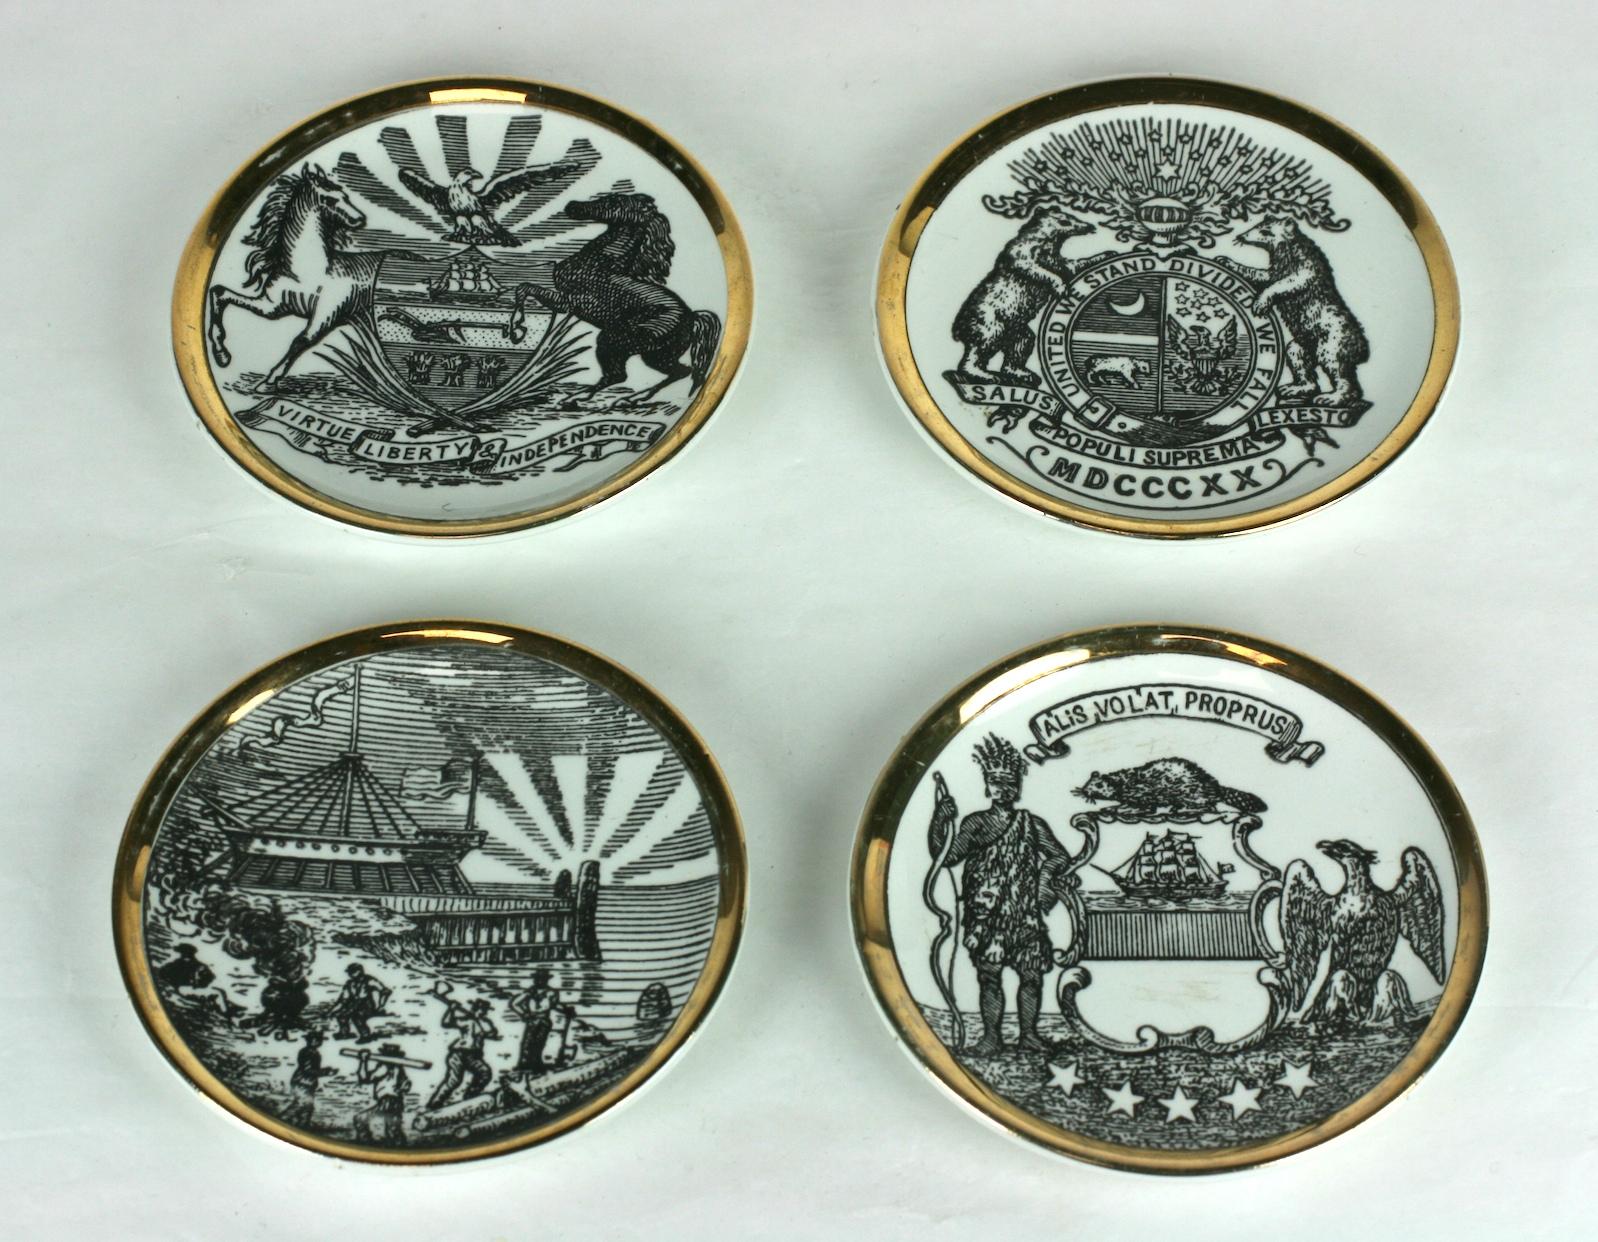 Piero Fornesetti's 8 piece coaster set with the emblems of various states in the US. Gilt decorated with lithographs of states emblems. Midcentury, Signed Fornesetti. 1950s Italy. 
Measures: 4